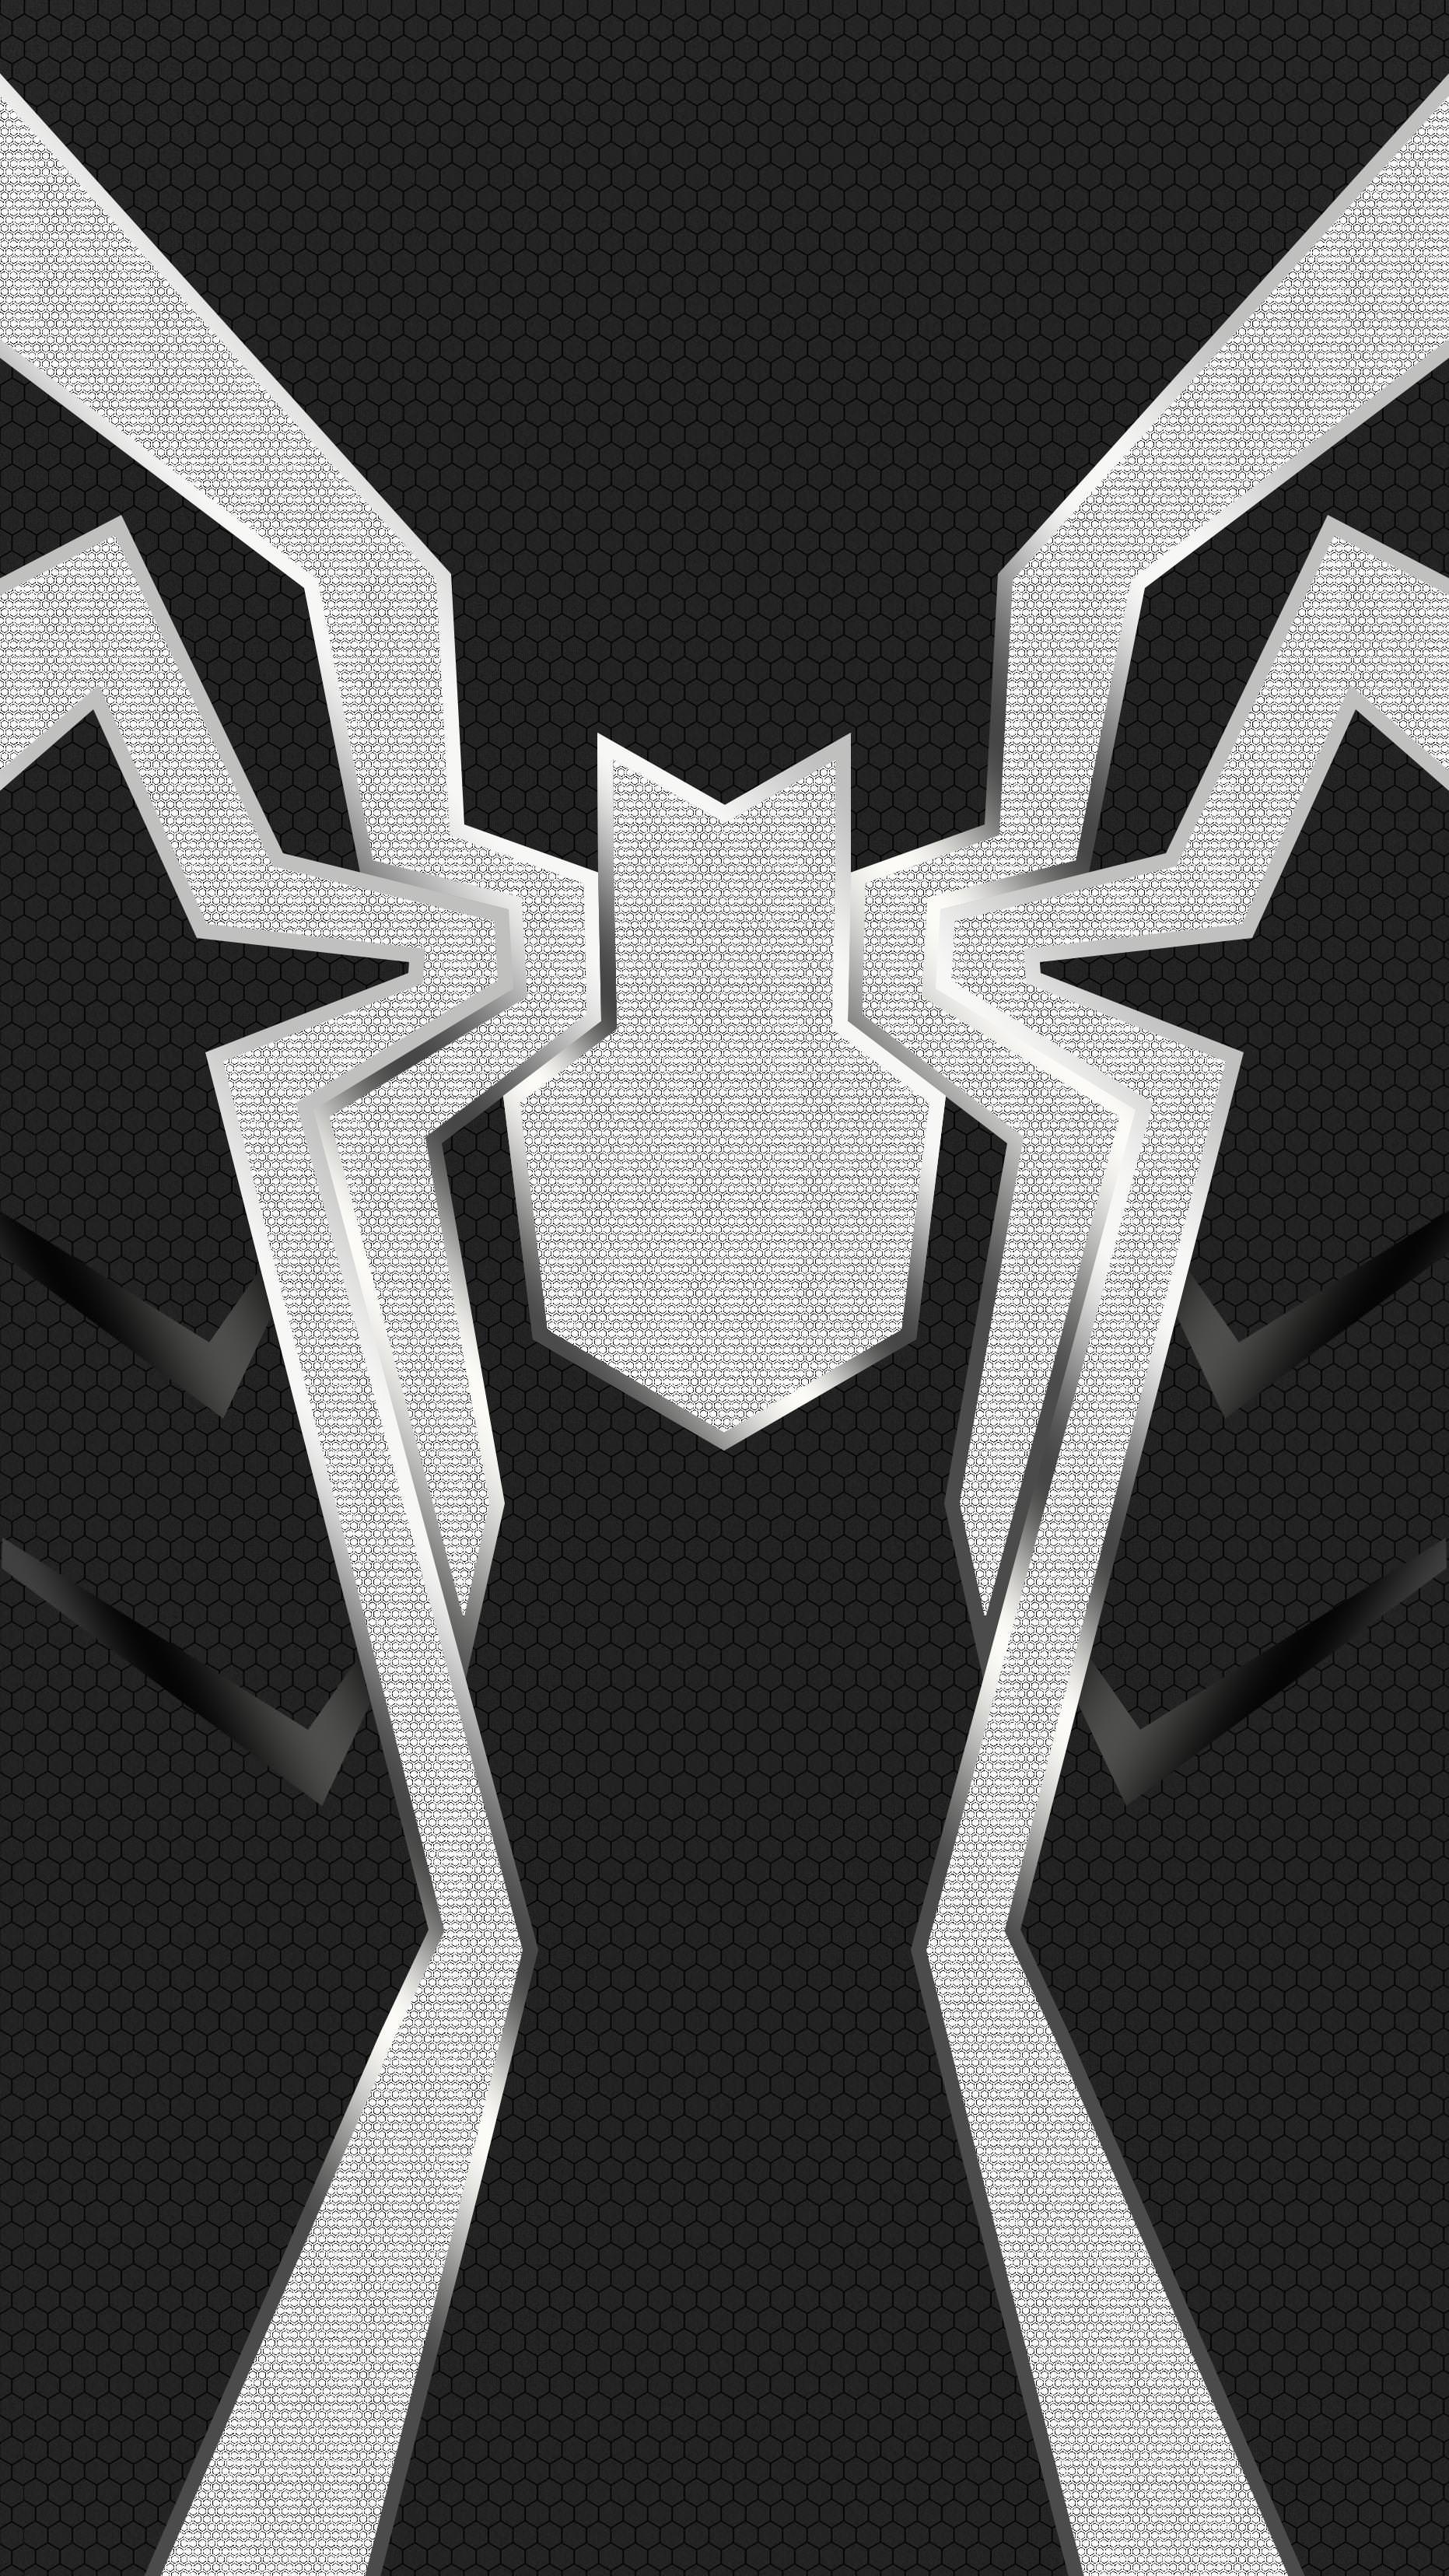 Created Spider Man Wallpaper Based Off The New Iron Suit